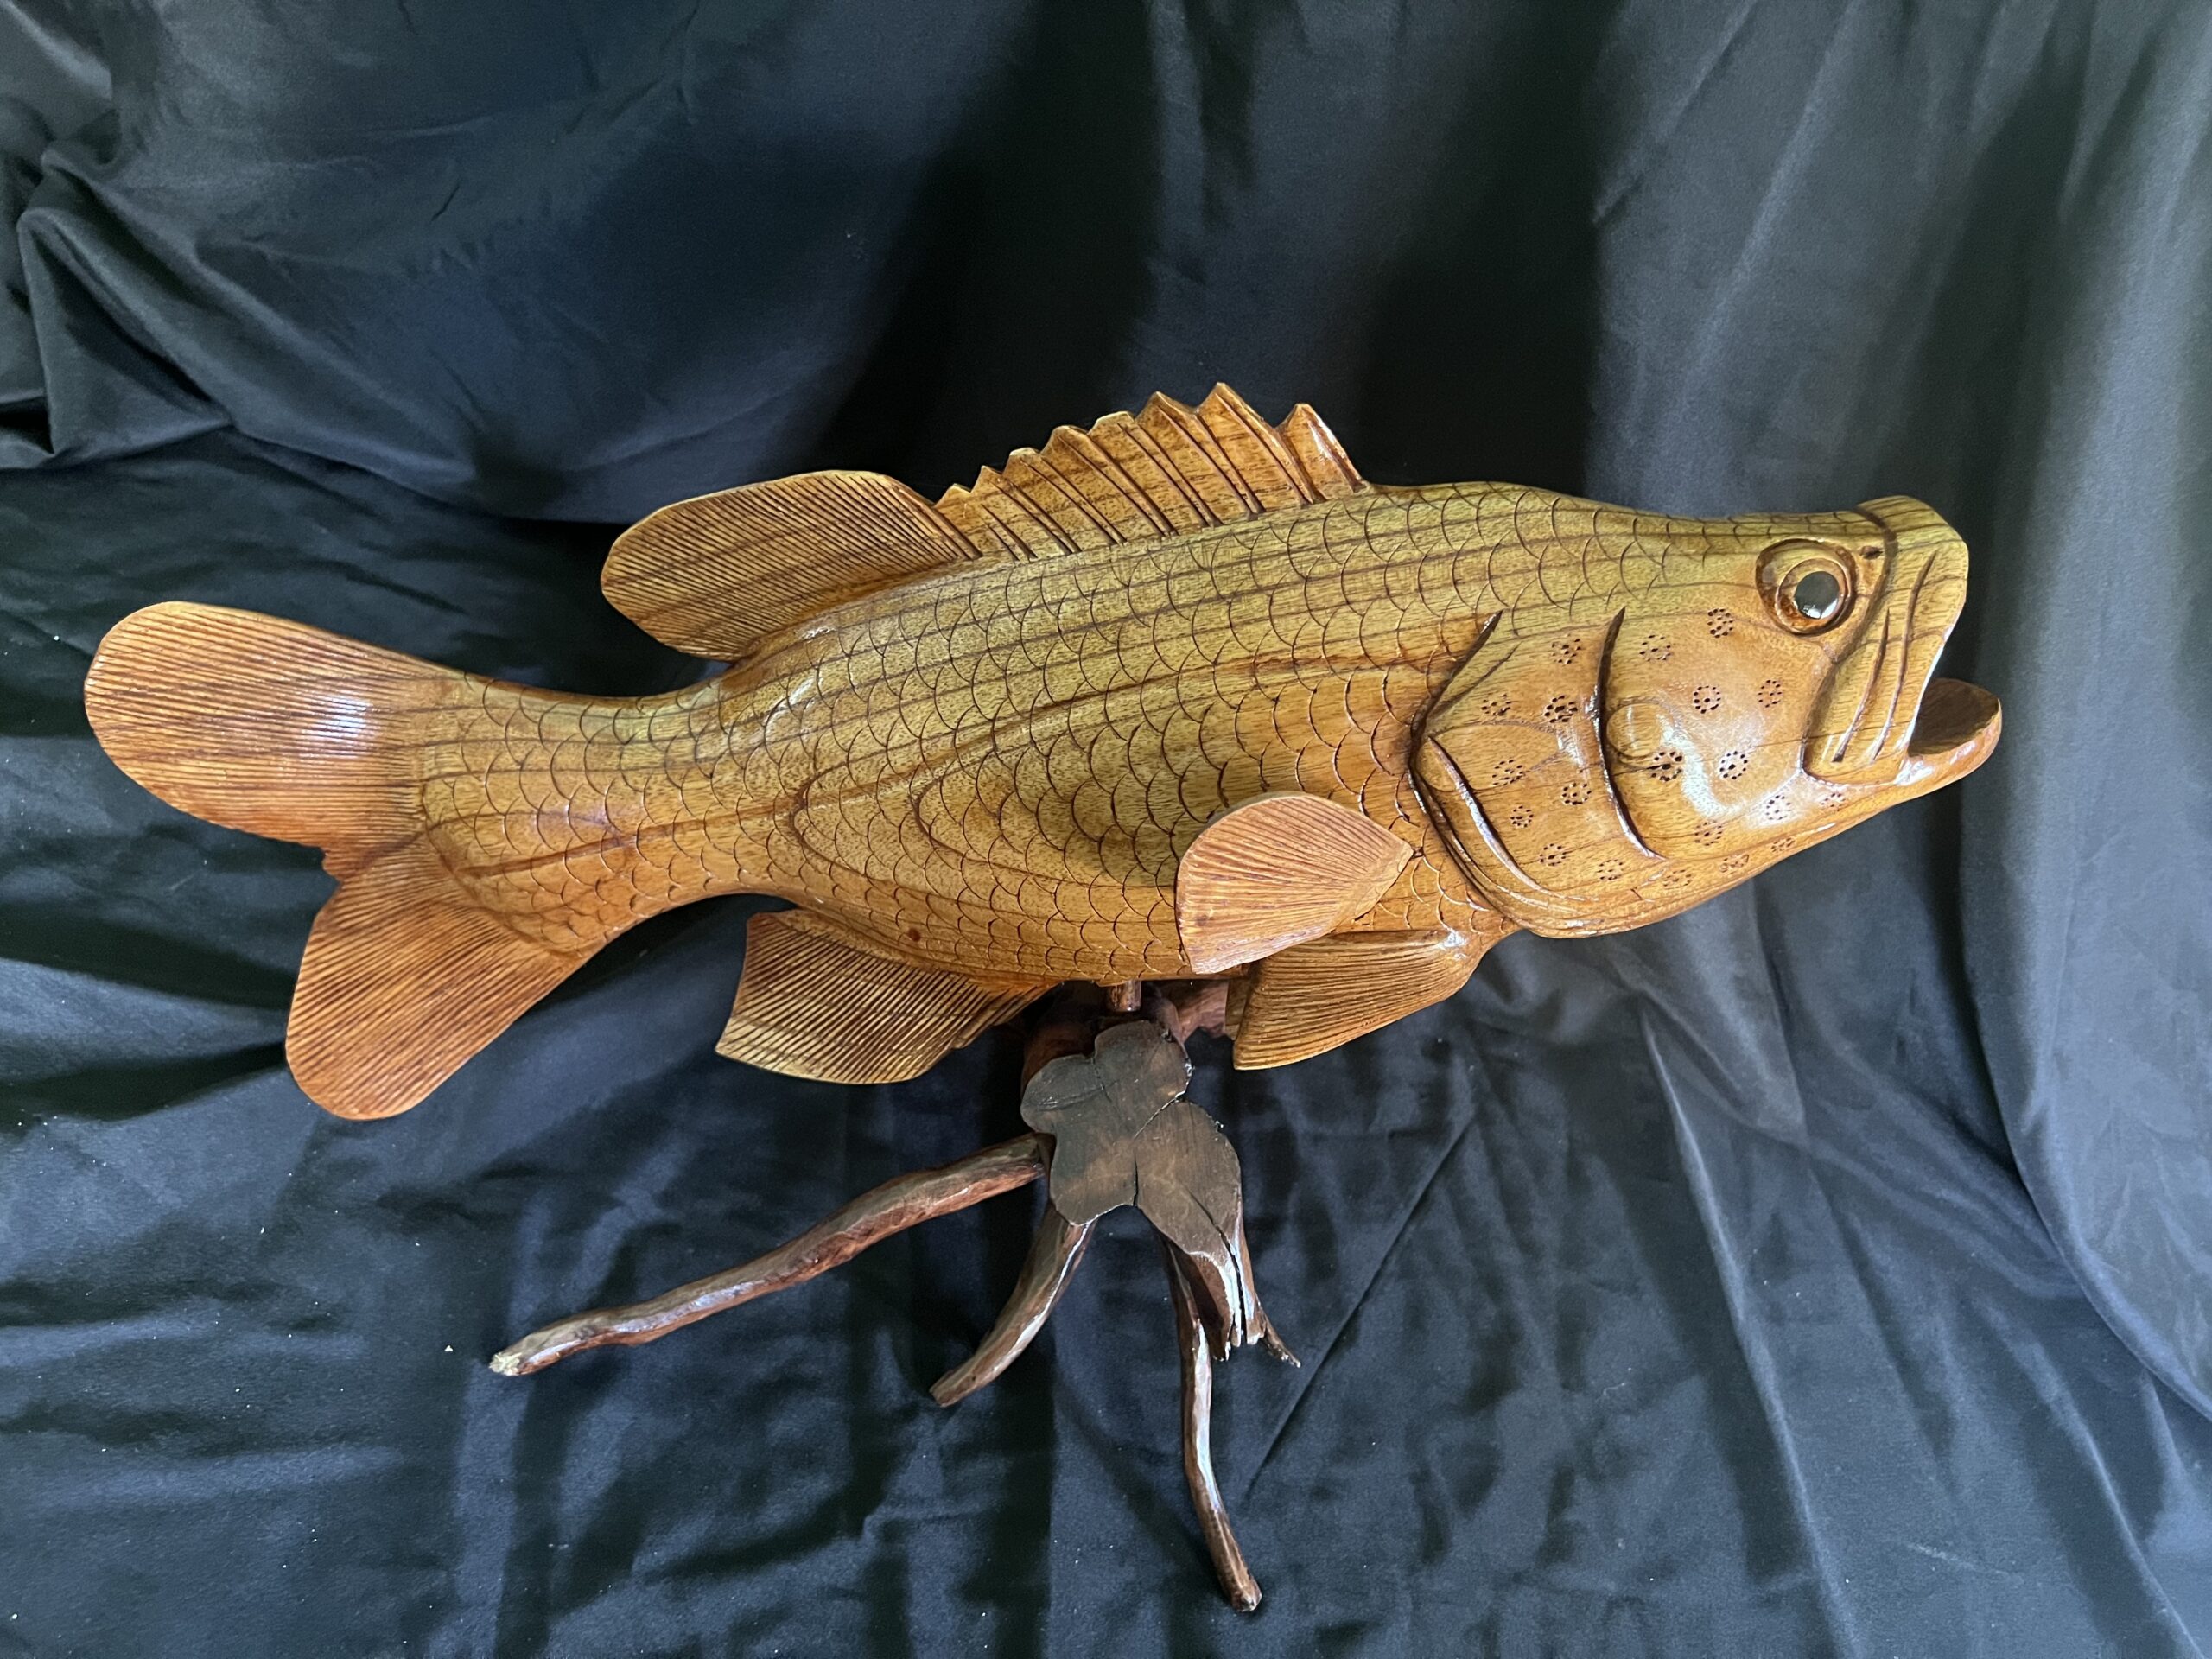 Highly Detailed Grouper or Bass Fish Wood Carving On Wood